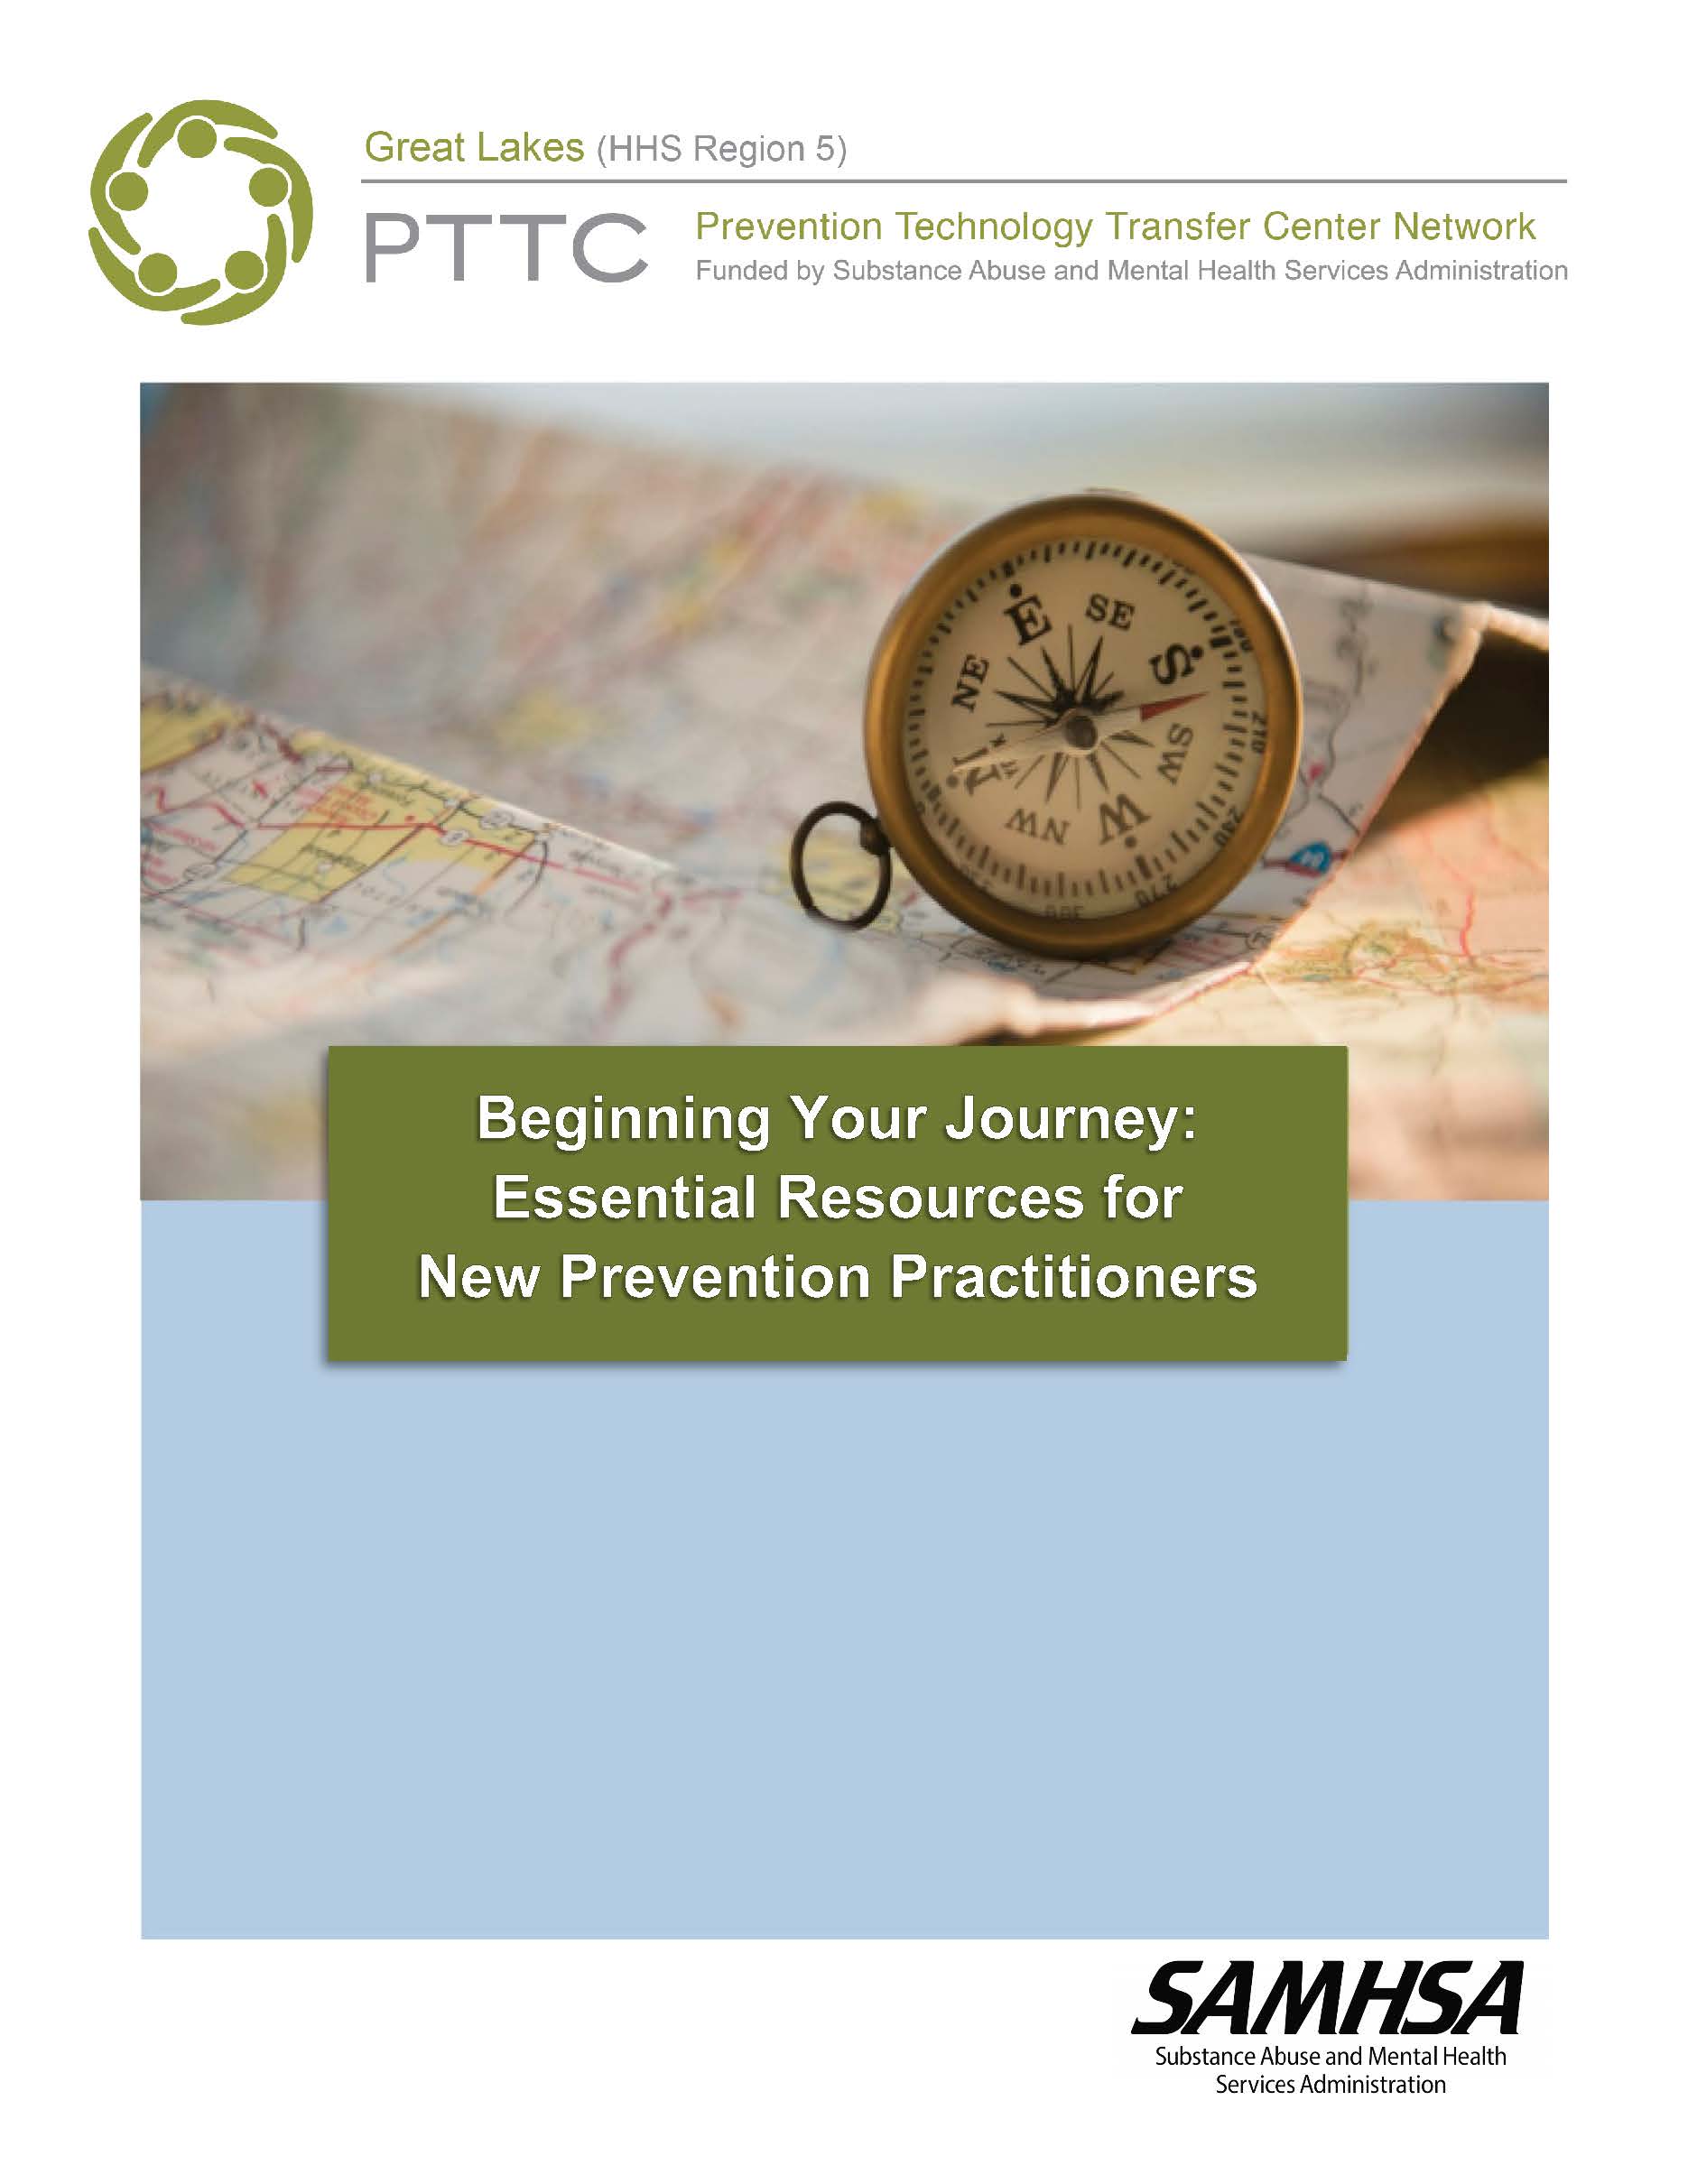 Beginning Your Journey: Essential Resources for New Prevention Practitioners